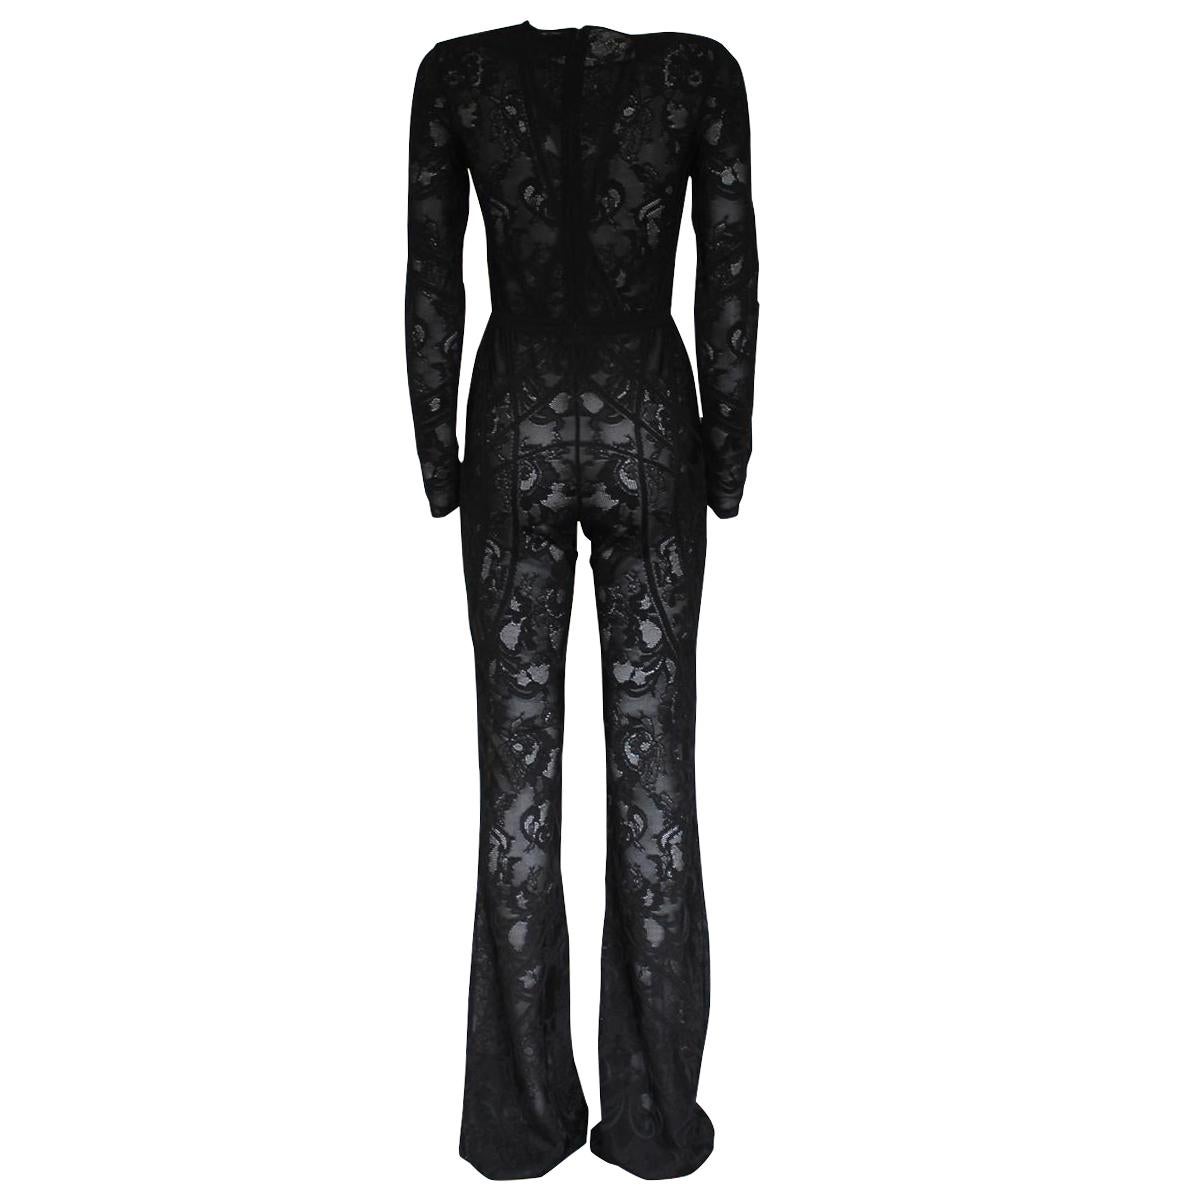 Fantastic Zuhair Murad overall
Silk, leather, rayon
Viscose (97%) Polyester
Black color
Long sleeves
Pants with large bottom
Length shoulder/hem cm 167 (65.7 inches)
Shoulder length cm 37 (14.5 inches)
WORLDWIDE EXPRESS SHIPPING INCLUDED IN THE